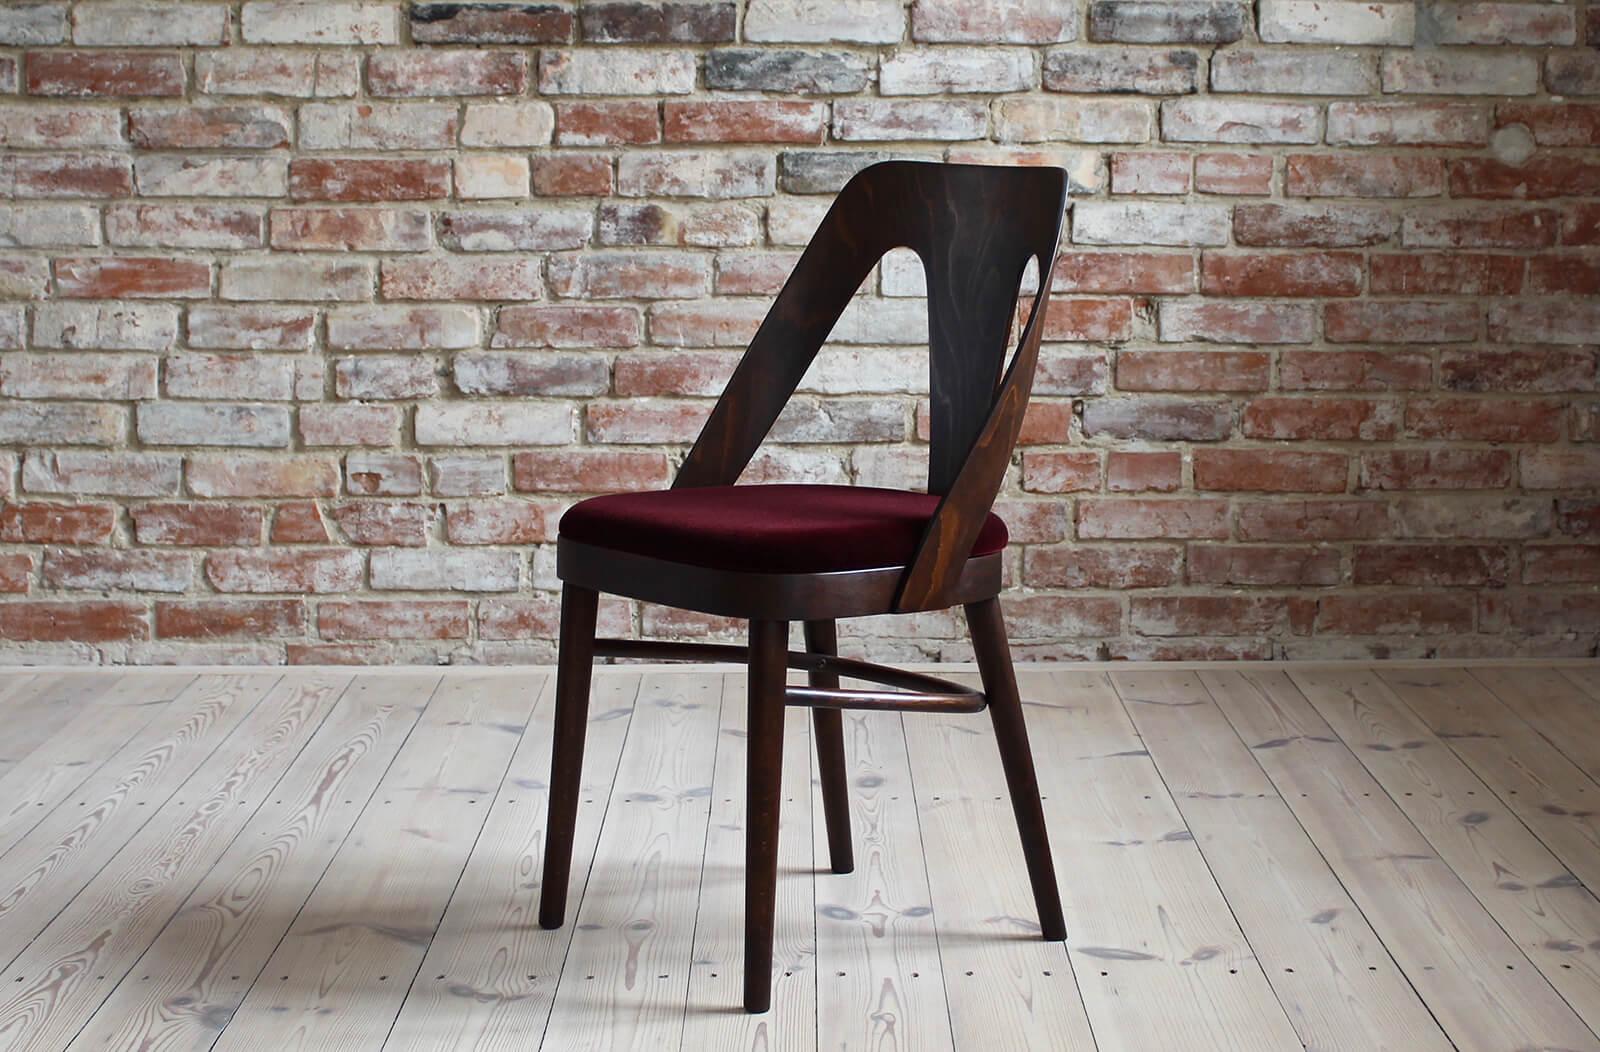 Set of 8 Midcentury Dining Chairs in Burgundy Mohair by Kvadrat 2